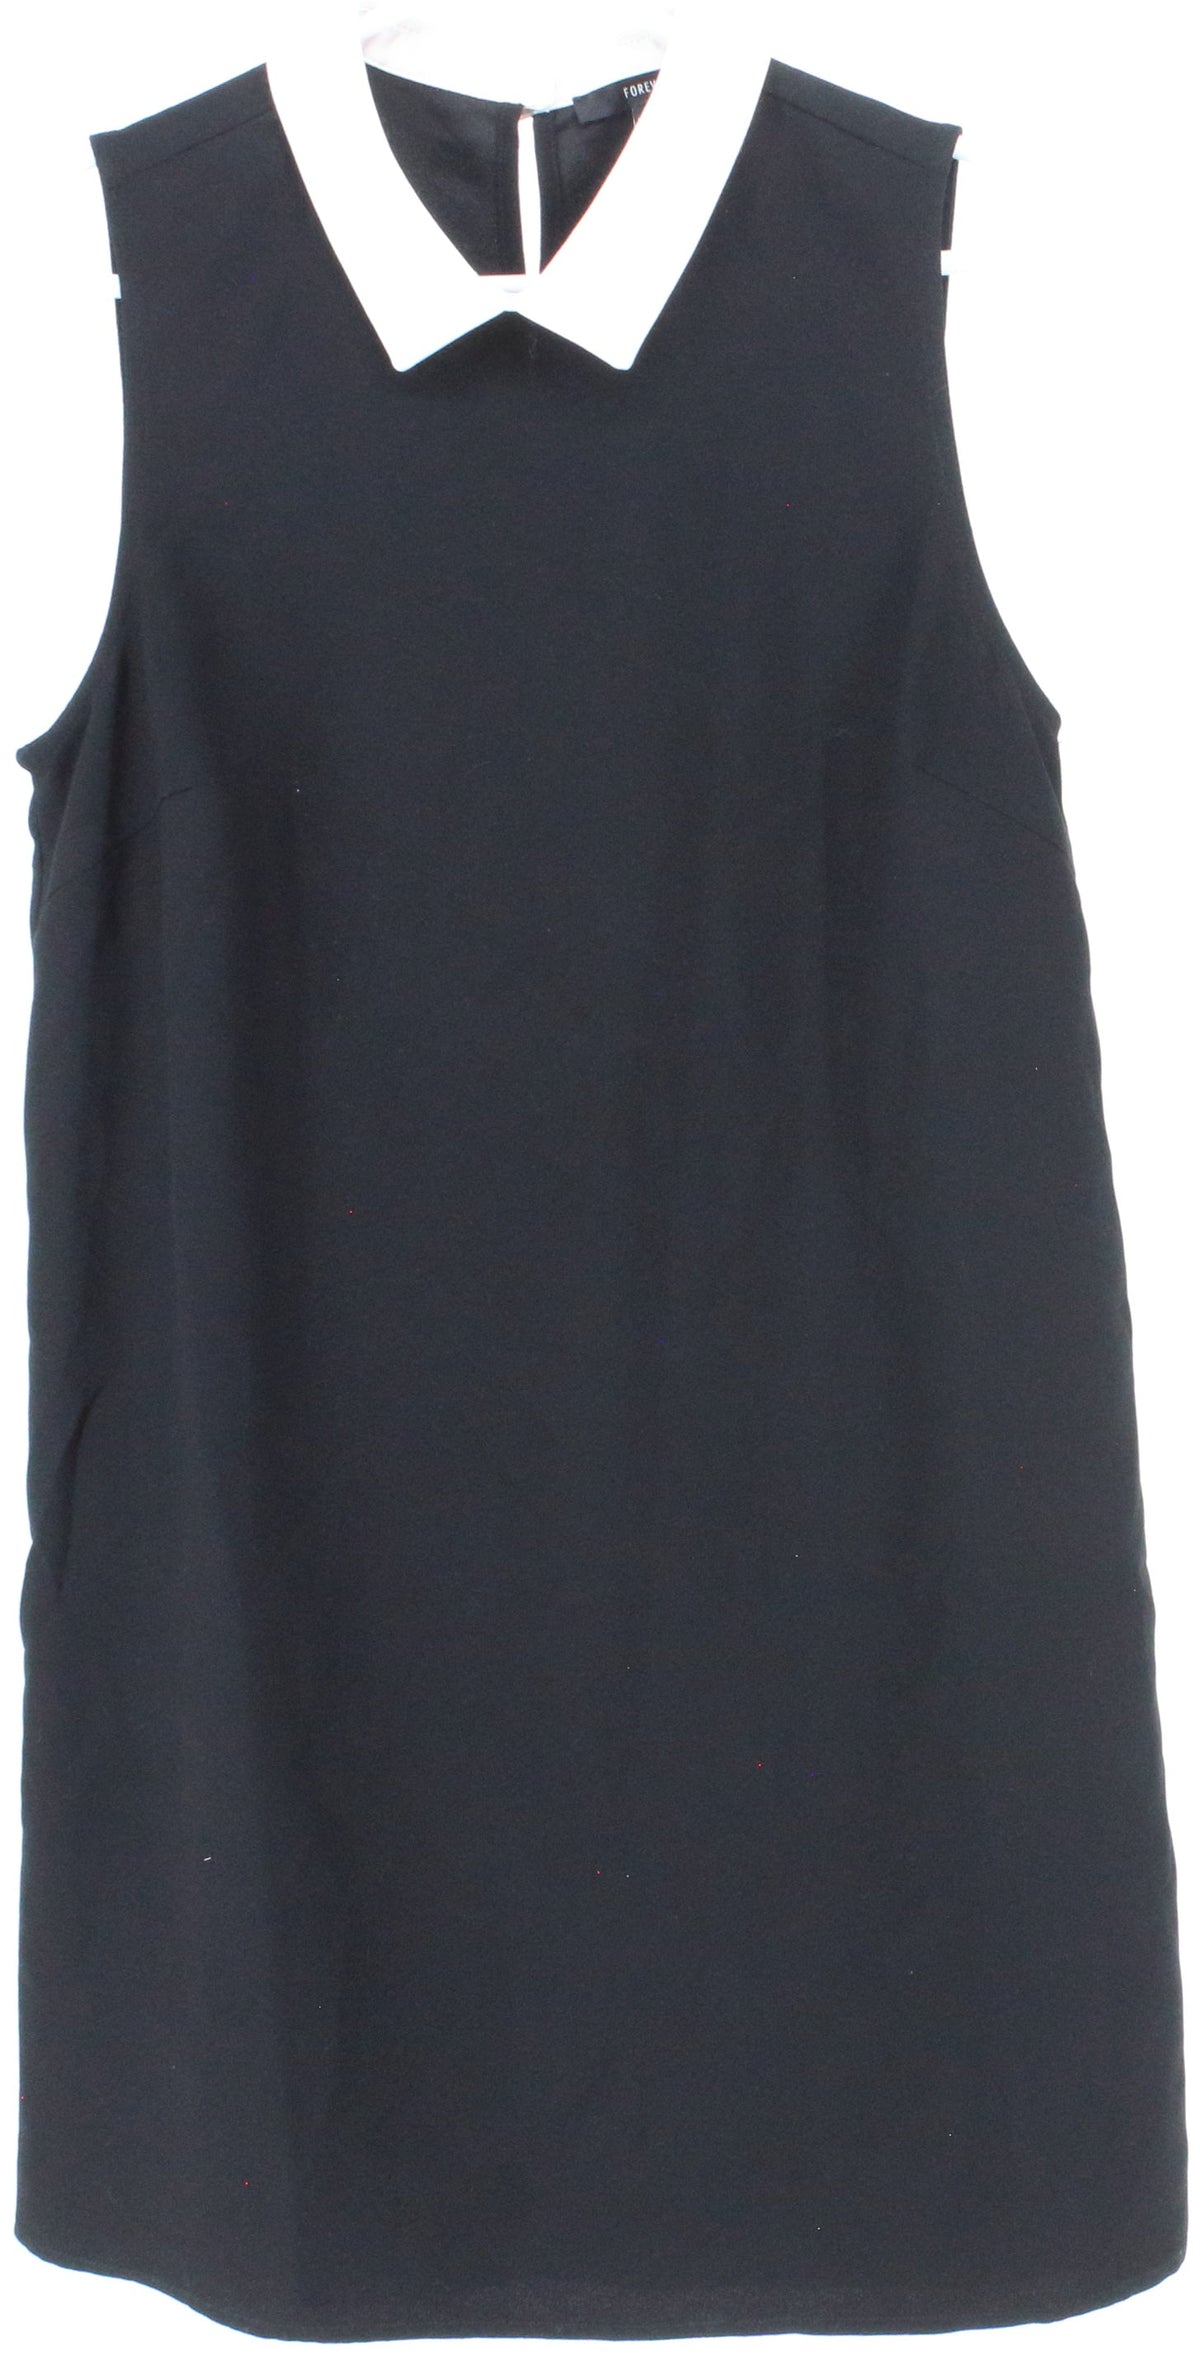 Forever 21 Black Dress With White Collar